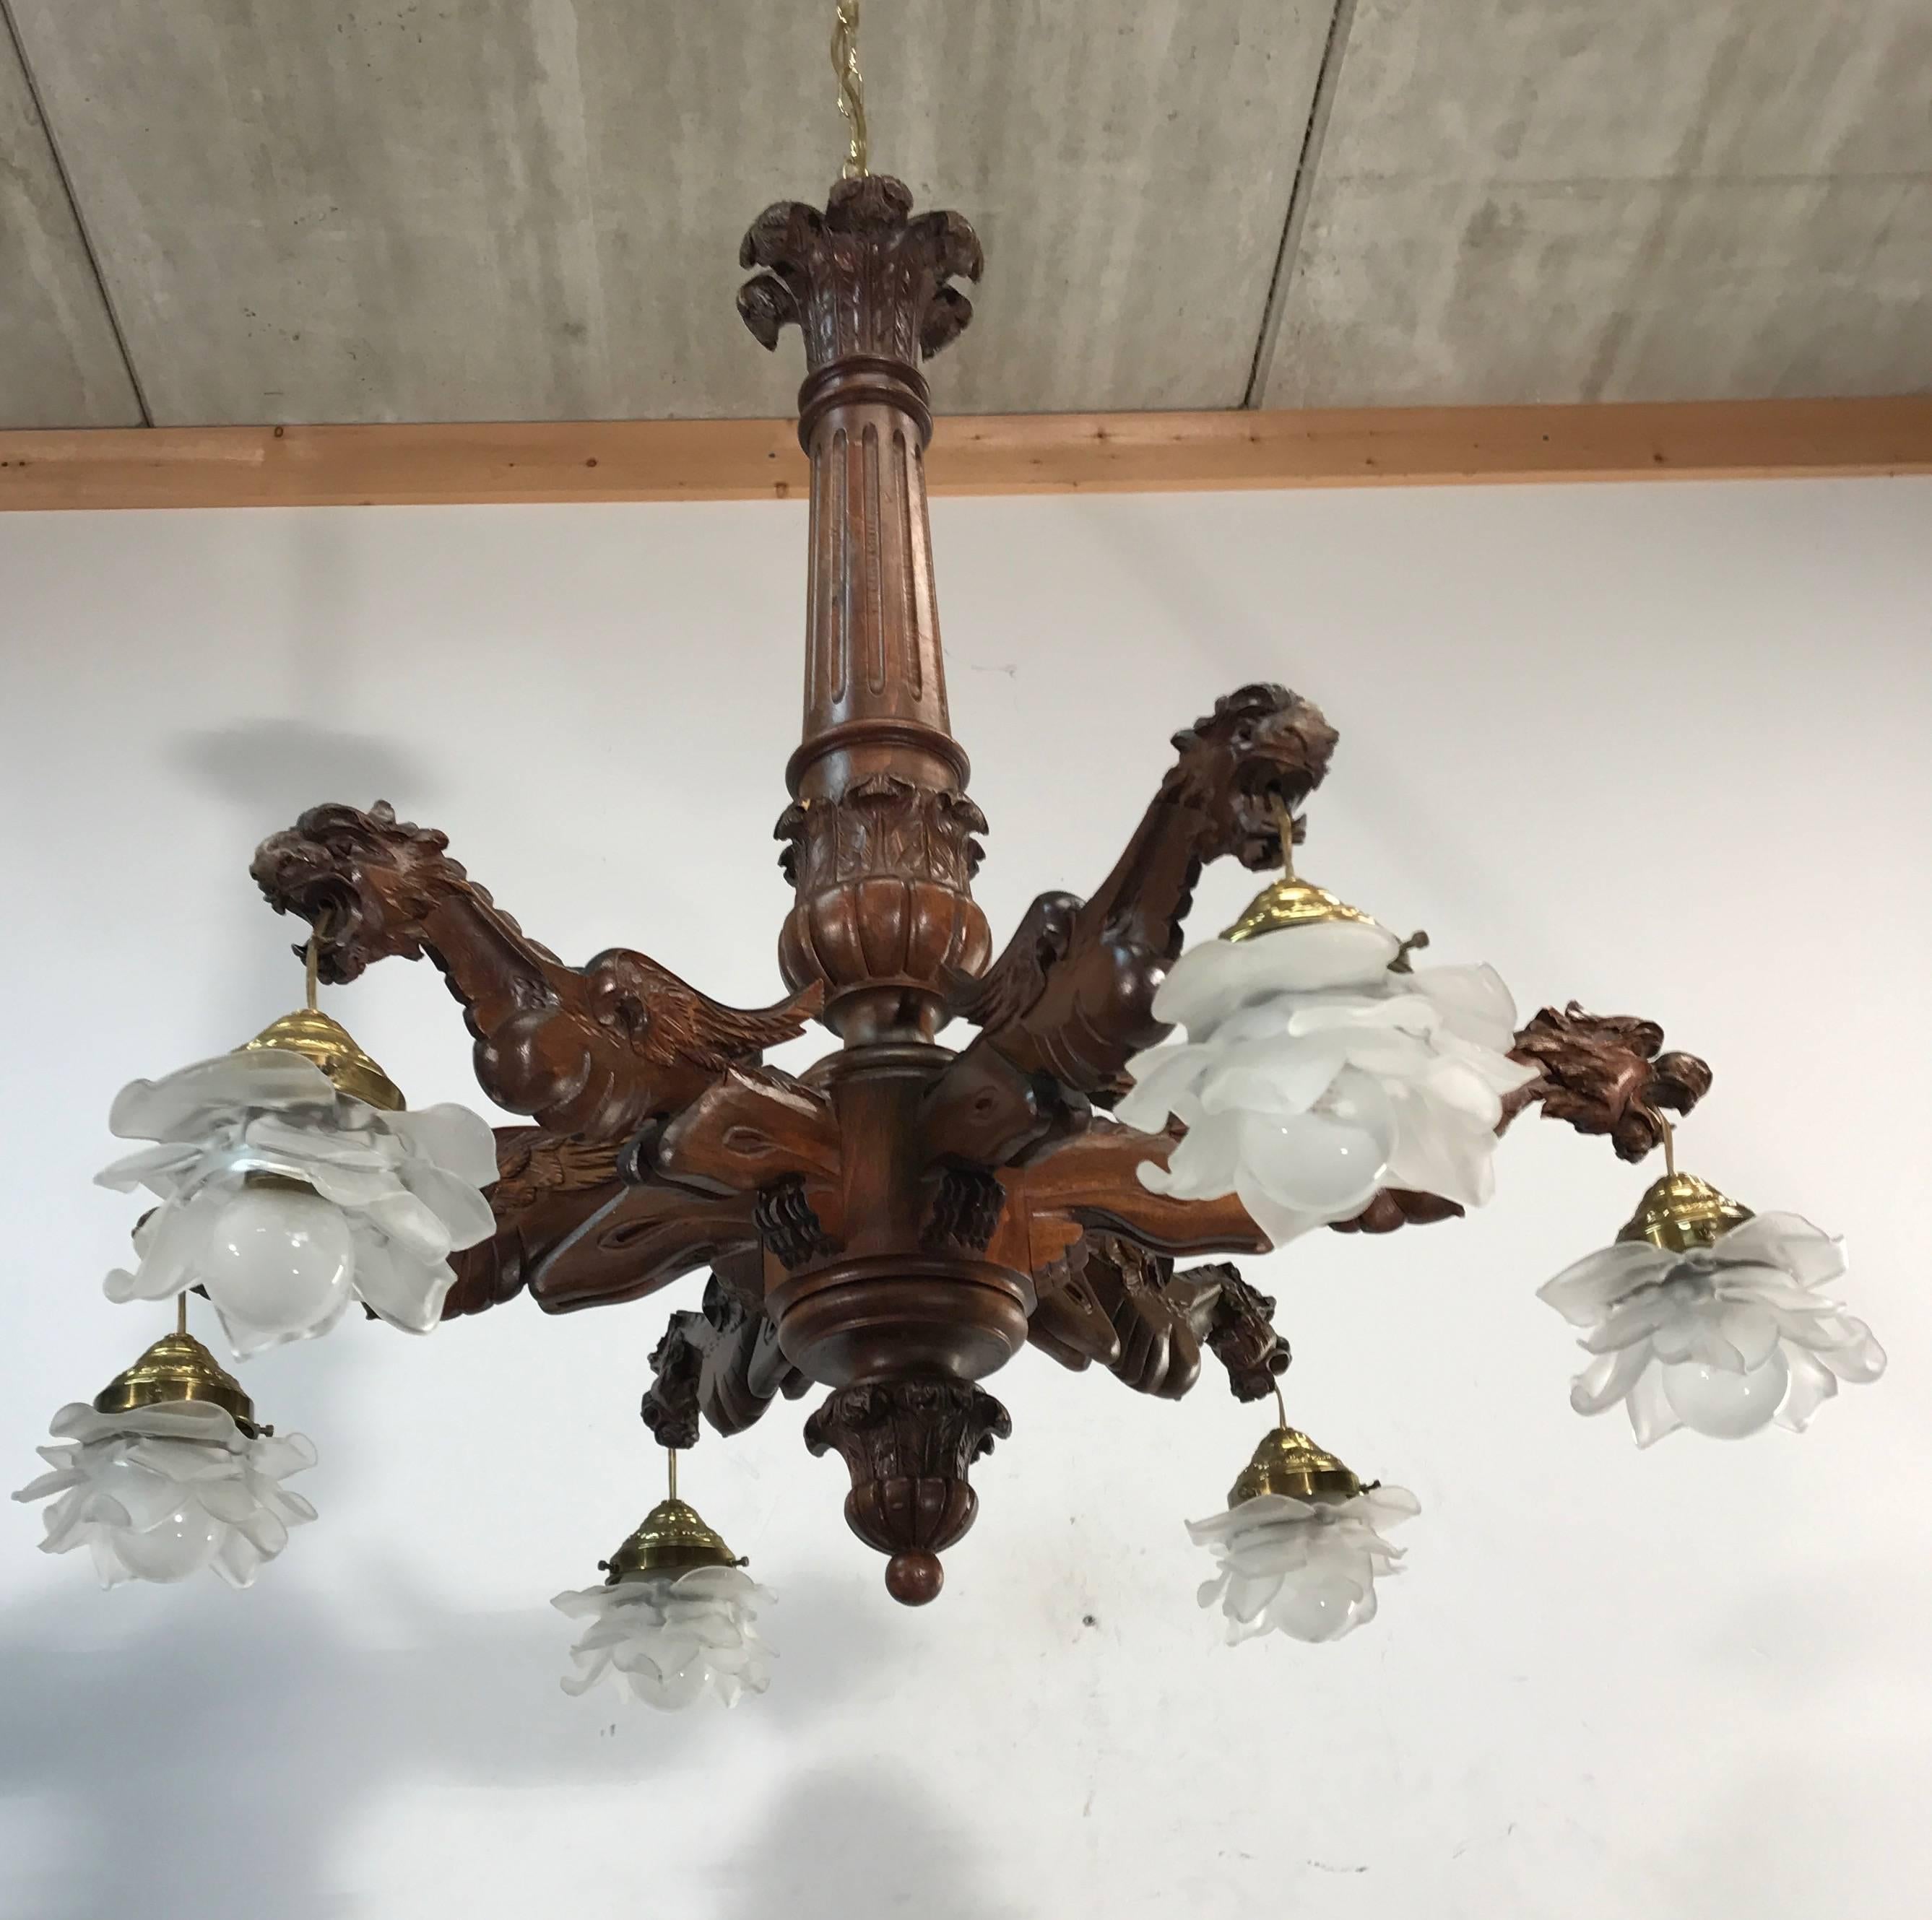 Good size and carved in beautiful detail.

This handcrafted chandelier comes with six arms and on the end of each arm there is a stunning and well carved dragon. They have a fierce expression and when you turn the light switch they will spit their